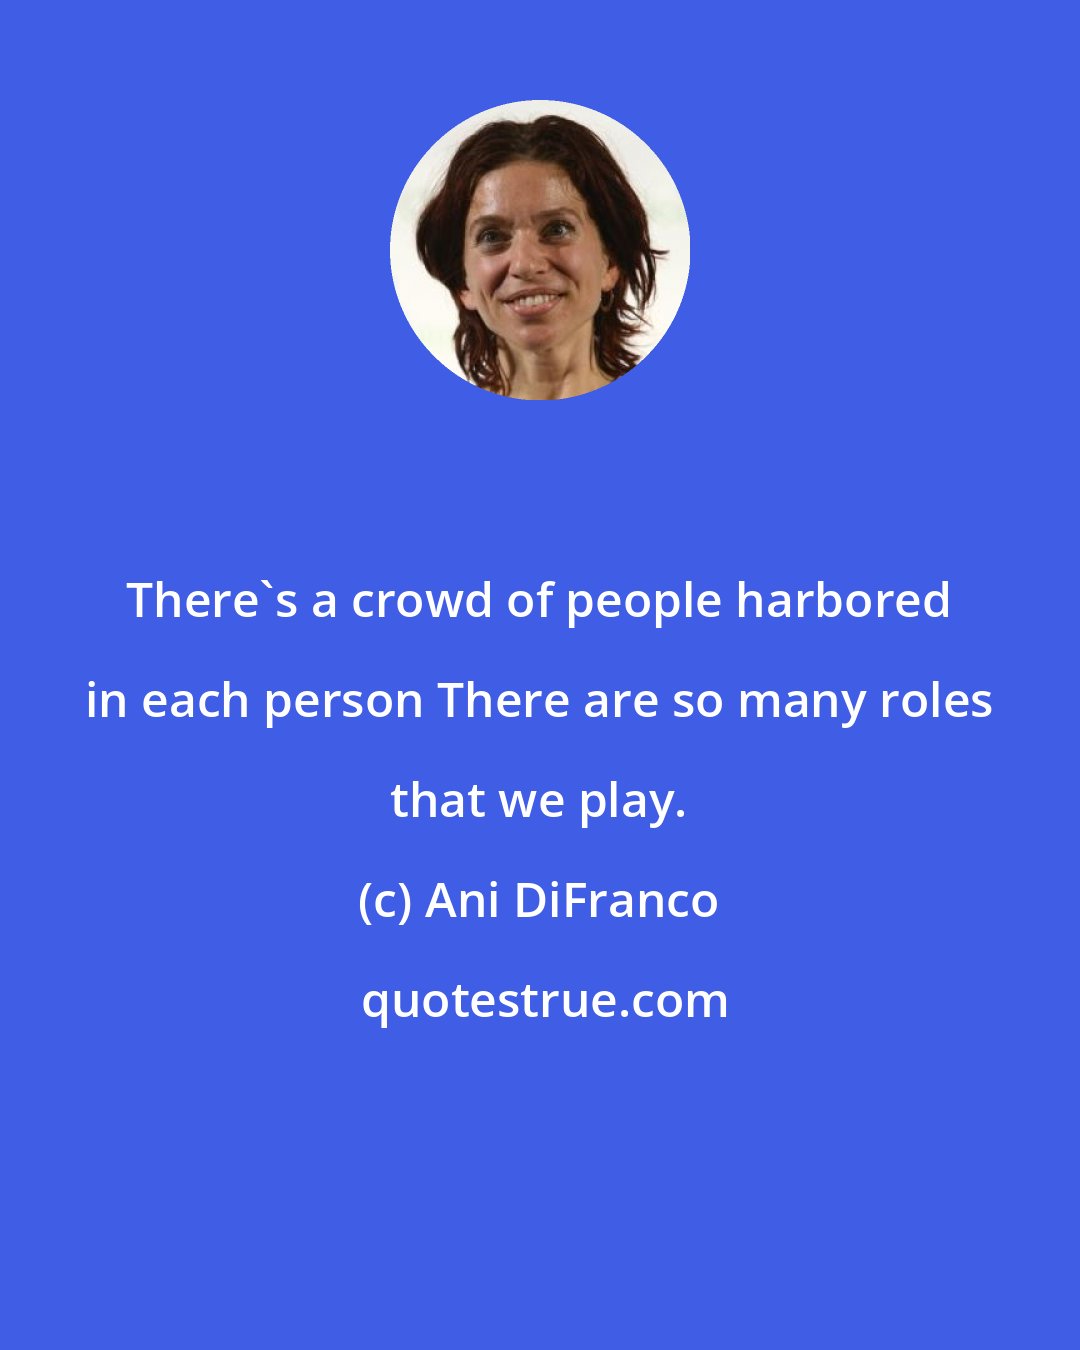 Ani DiFranco: There's a crowd of people harbored in each person There are so many roles that we play.